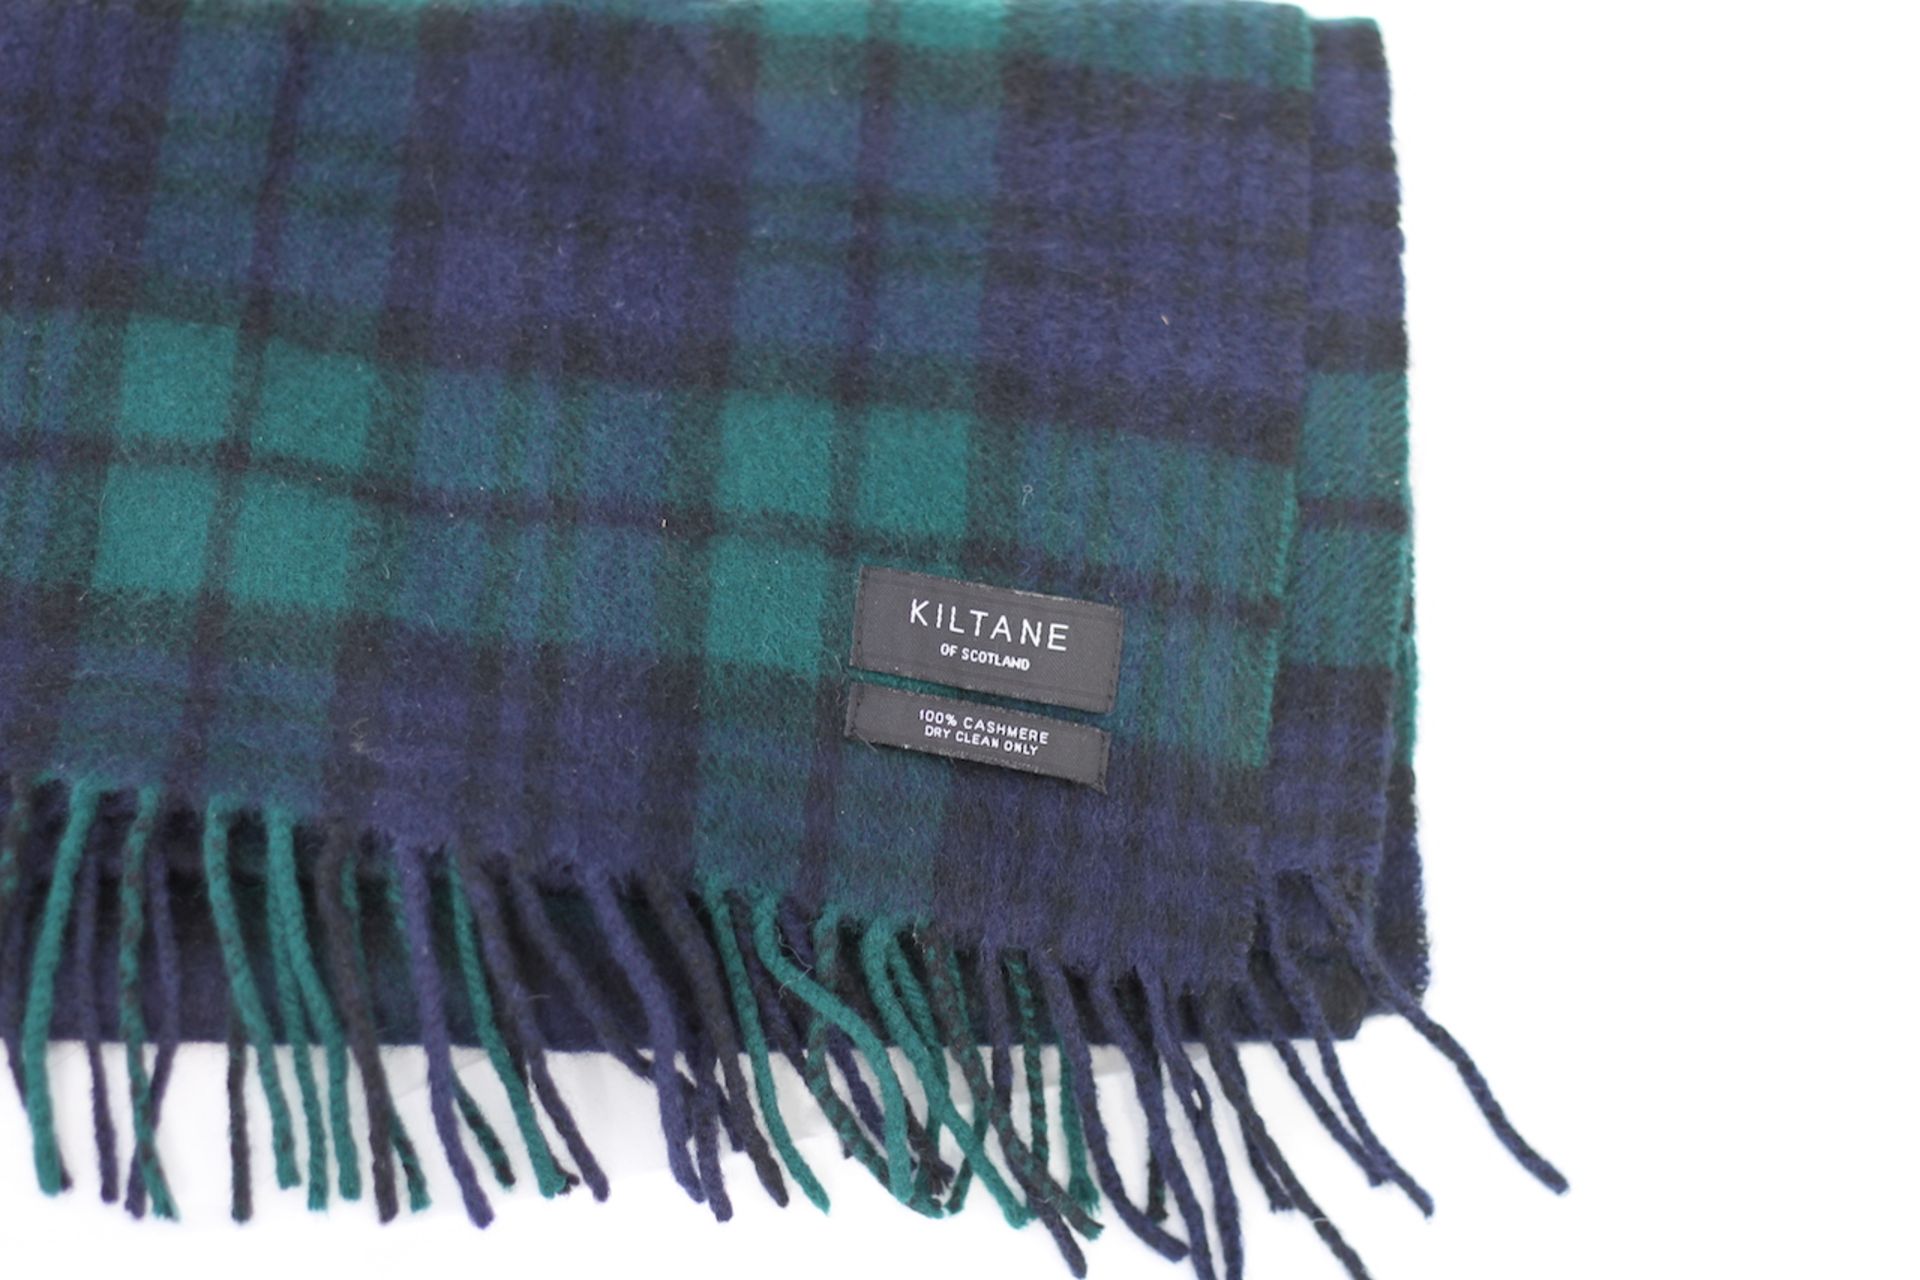 KILTANE OF SCOTLAND CASHMERE SCARF, Colour : GREEN PATTERNED, AGE: UNKNOWN, SIZE: ONE SIZE, - Image 2 of 2